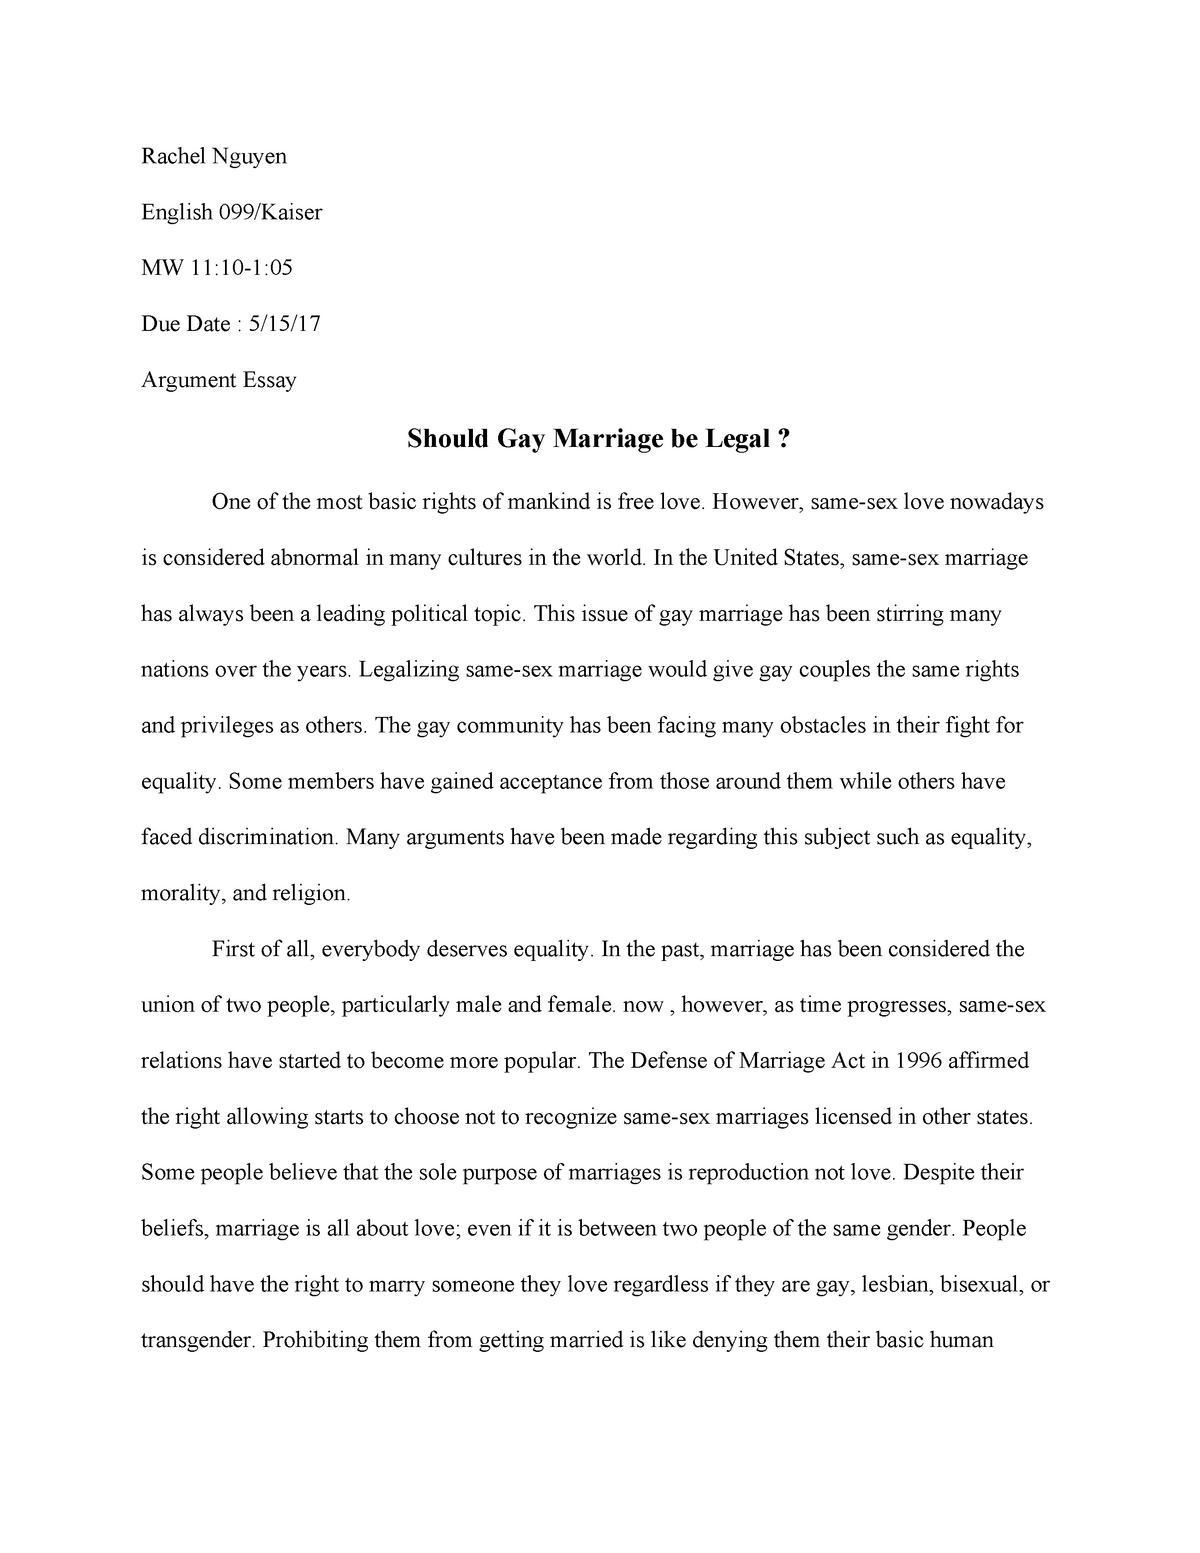 why should gay marriage not be legal essay